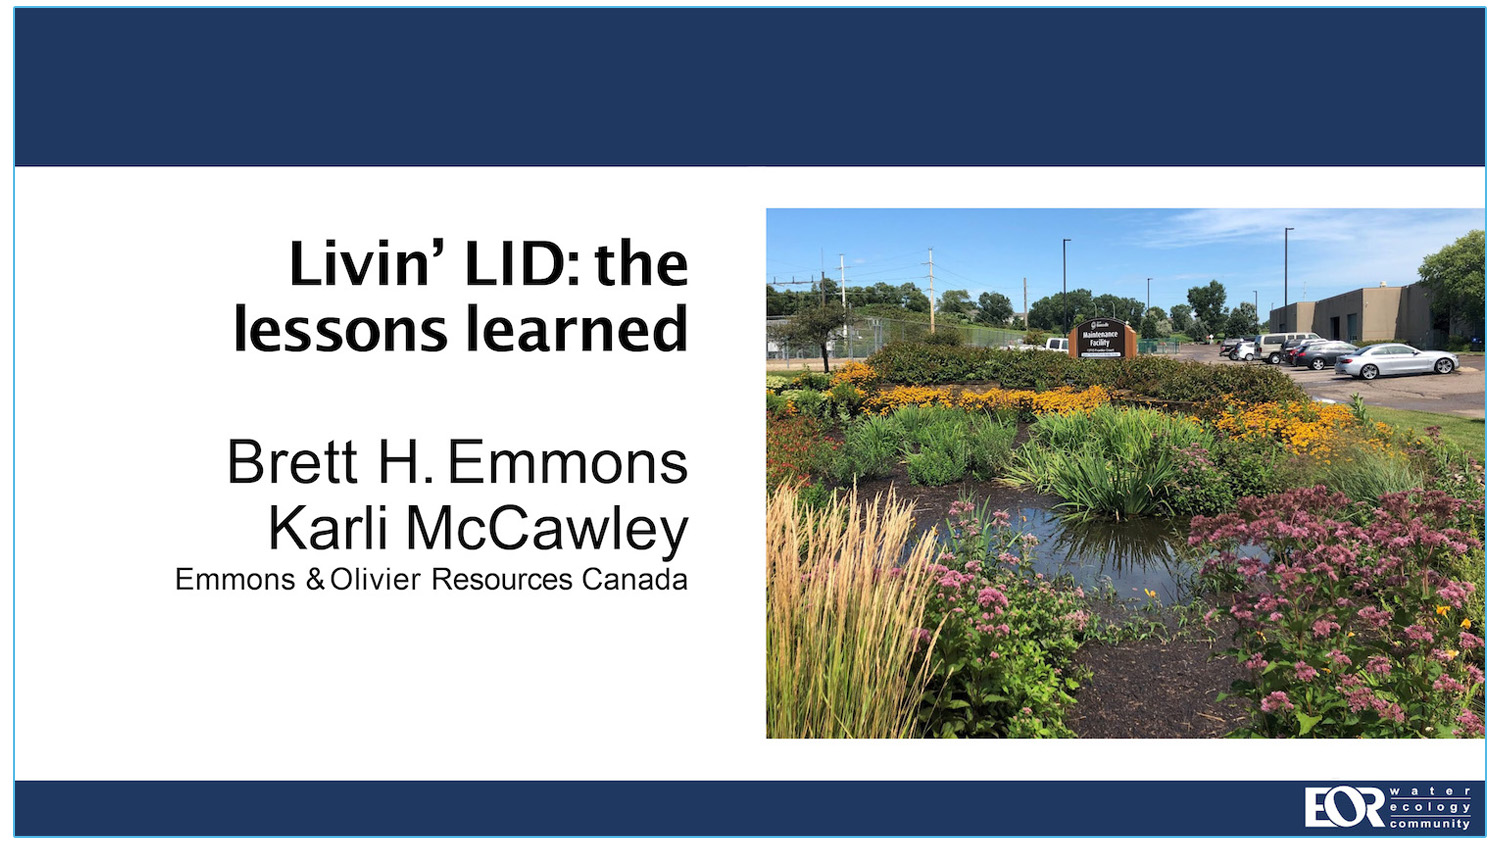 Livin LID - Presenters - Brett Emmons and Karli McCawley - Emmons and Olivier Resources